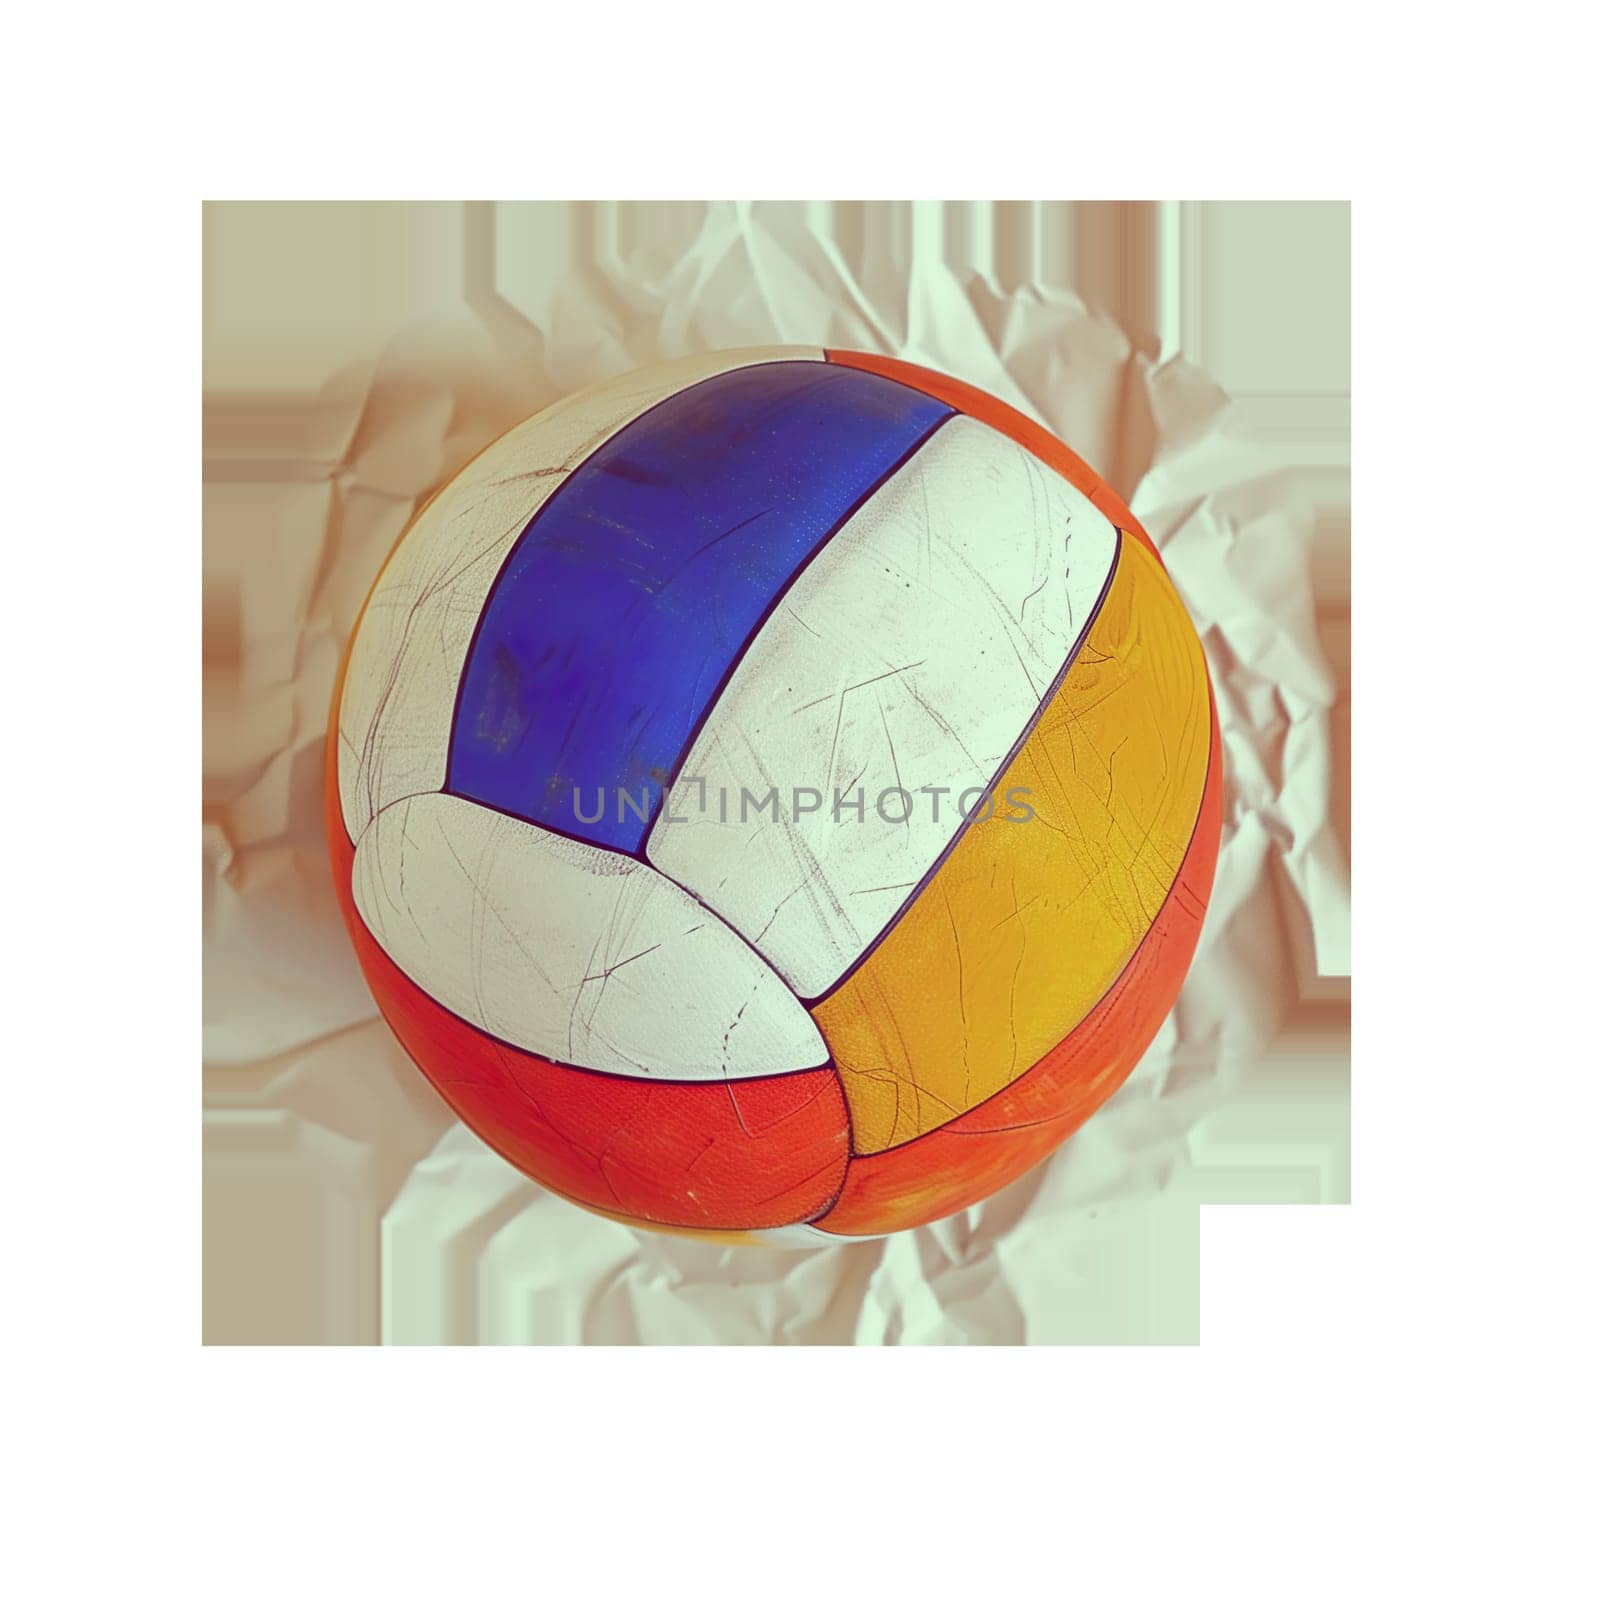 Volleyball ball on crumpled paper cut out image by Dustick